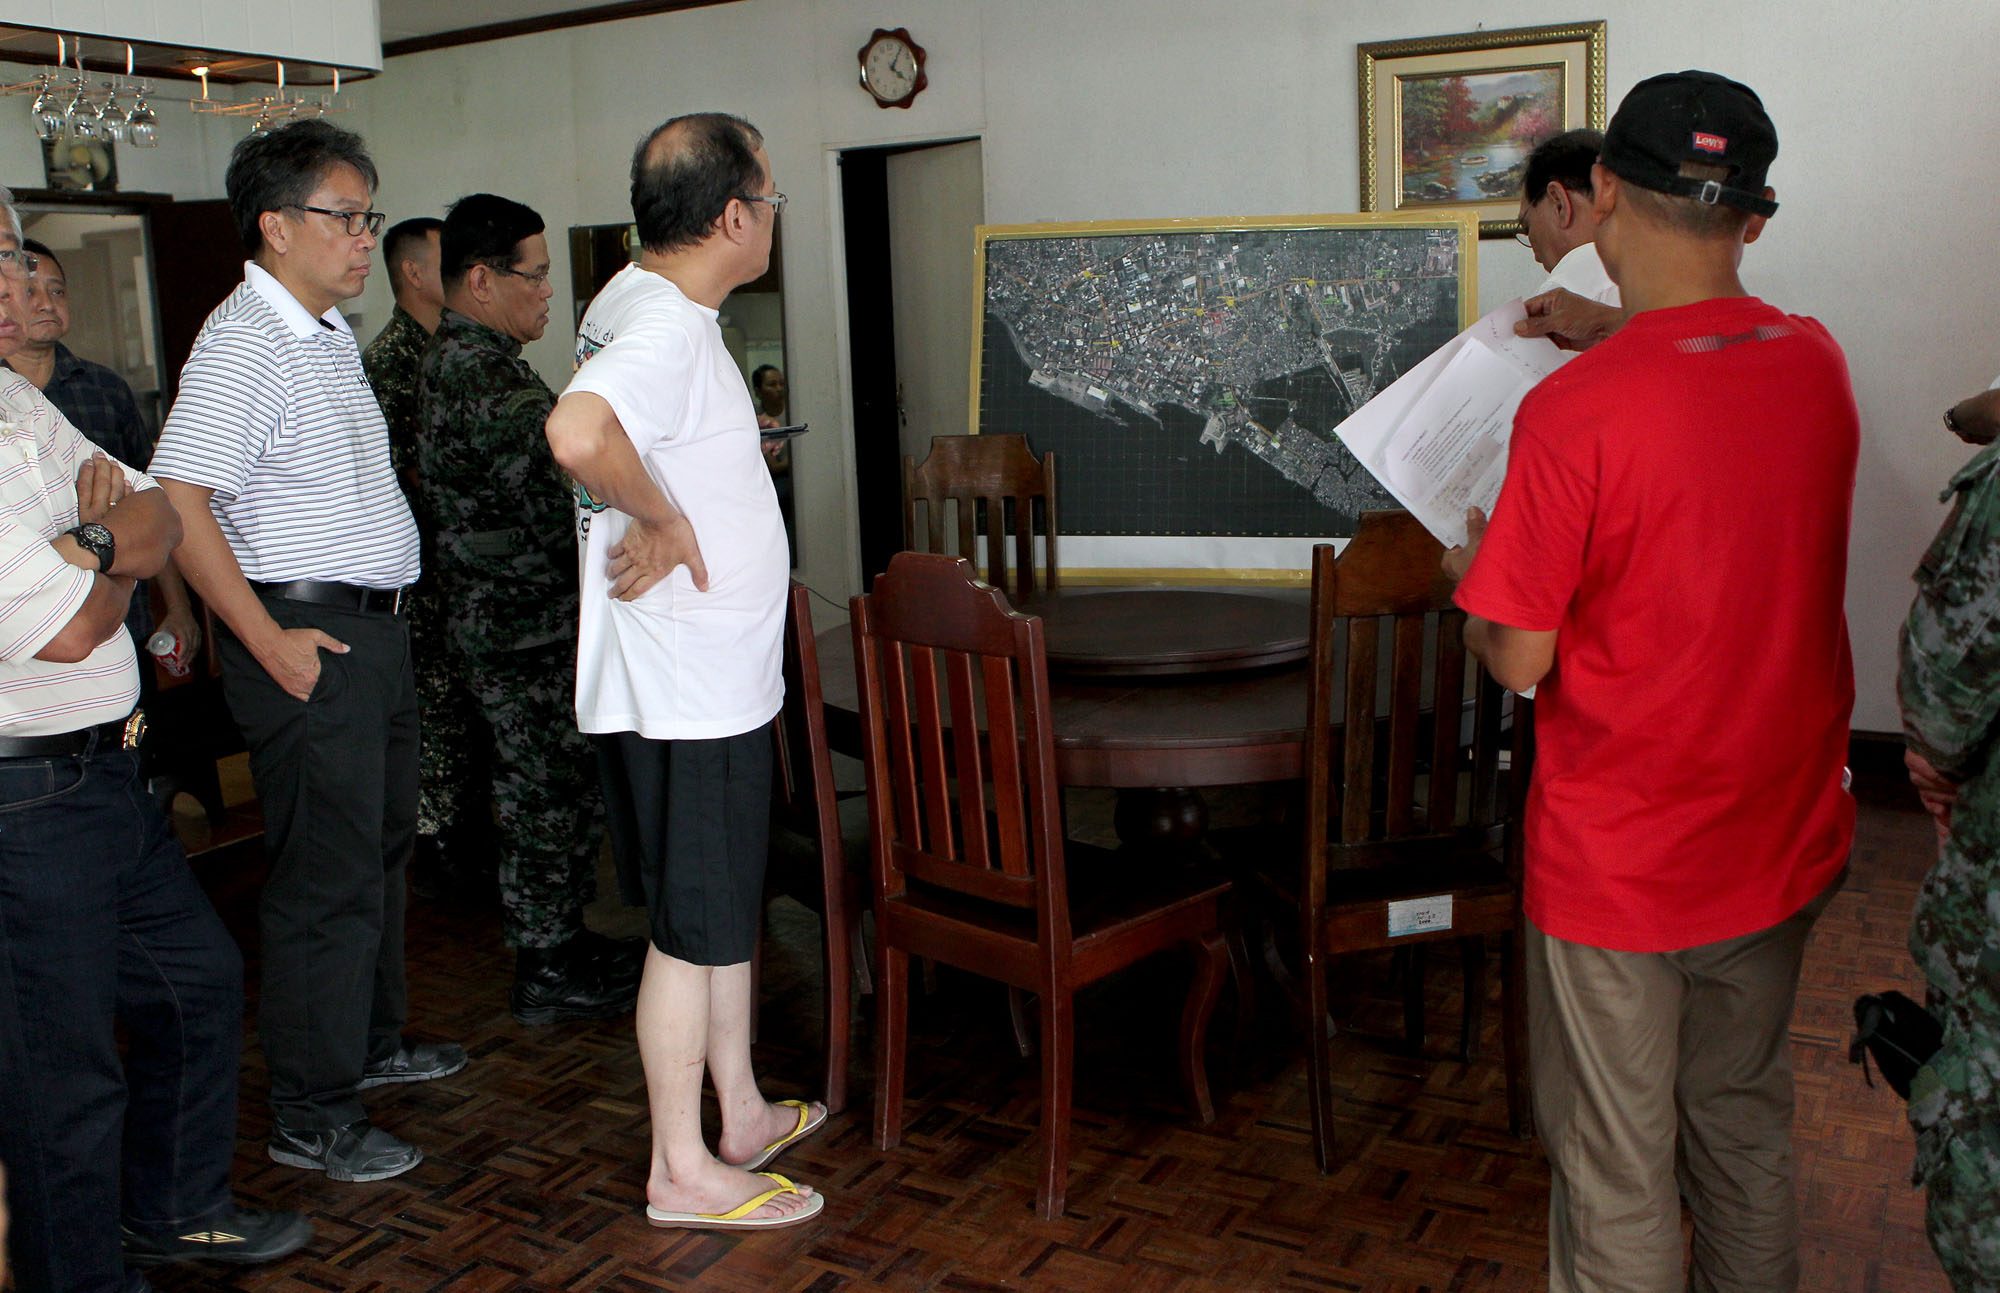 ZAMBOANGA SIEGE. A rare photo of the President in shorts and rubber slippers. They are briefed on the latest situation in the Zamboanga siege at the Edwin Andrews Air Base on September 15, 2013. He spends 11 days in the camp to personally oversee operations.   